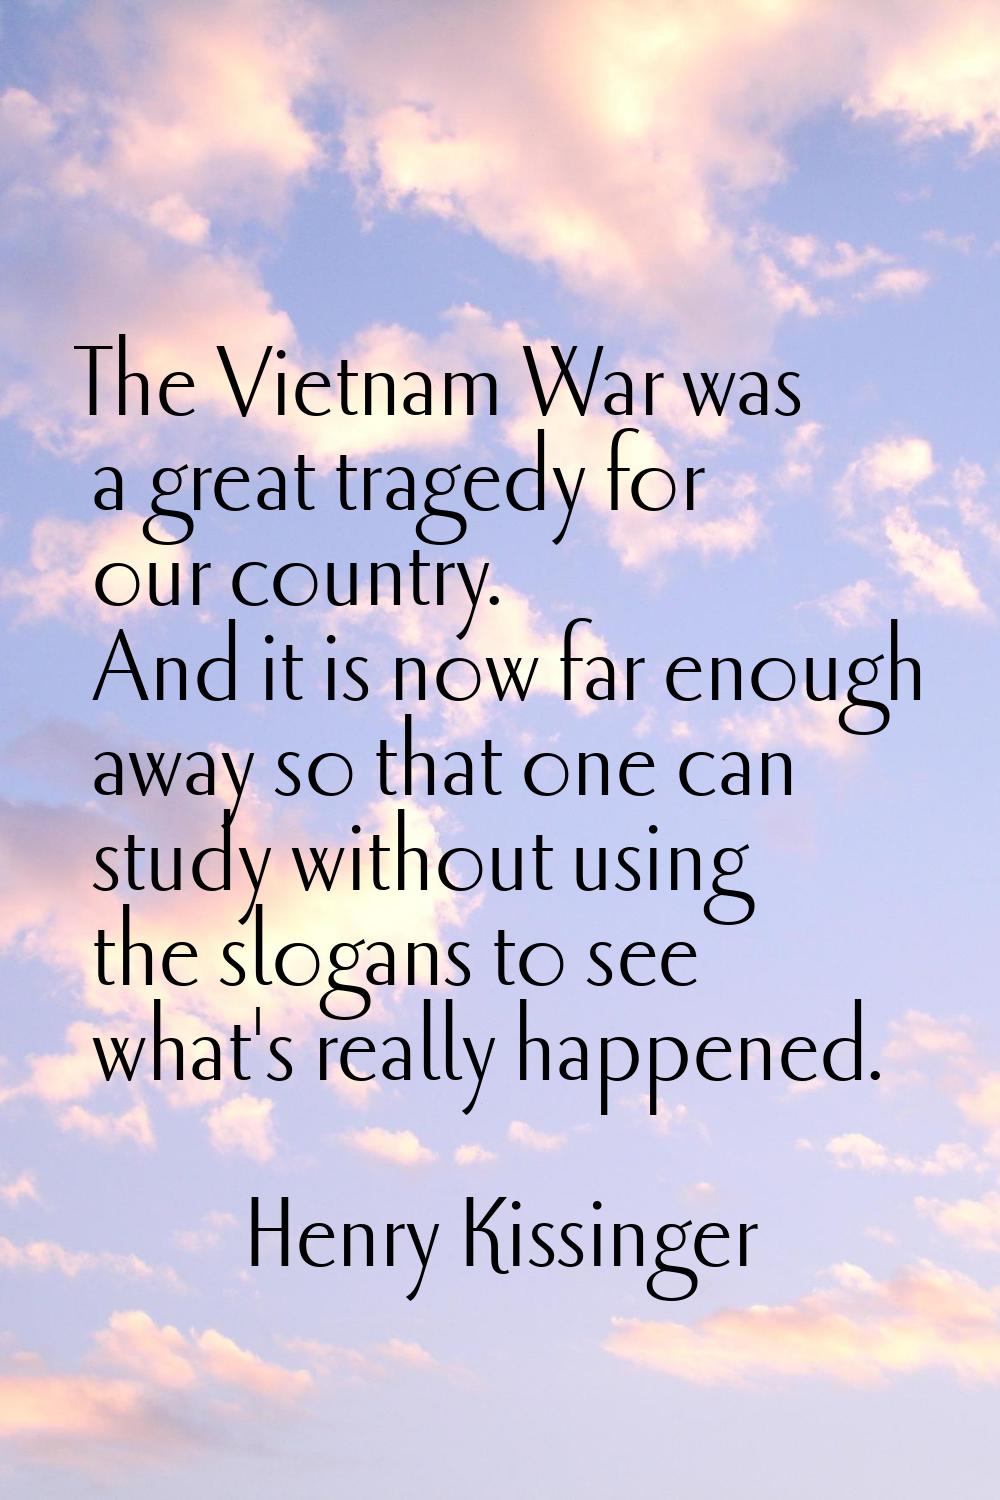 The Vietnam War was a great tragedy for our country. And it is now far enough away so that one can 